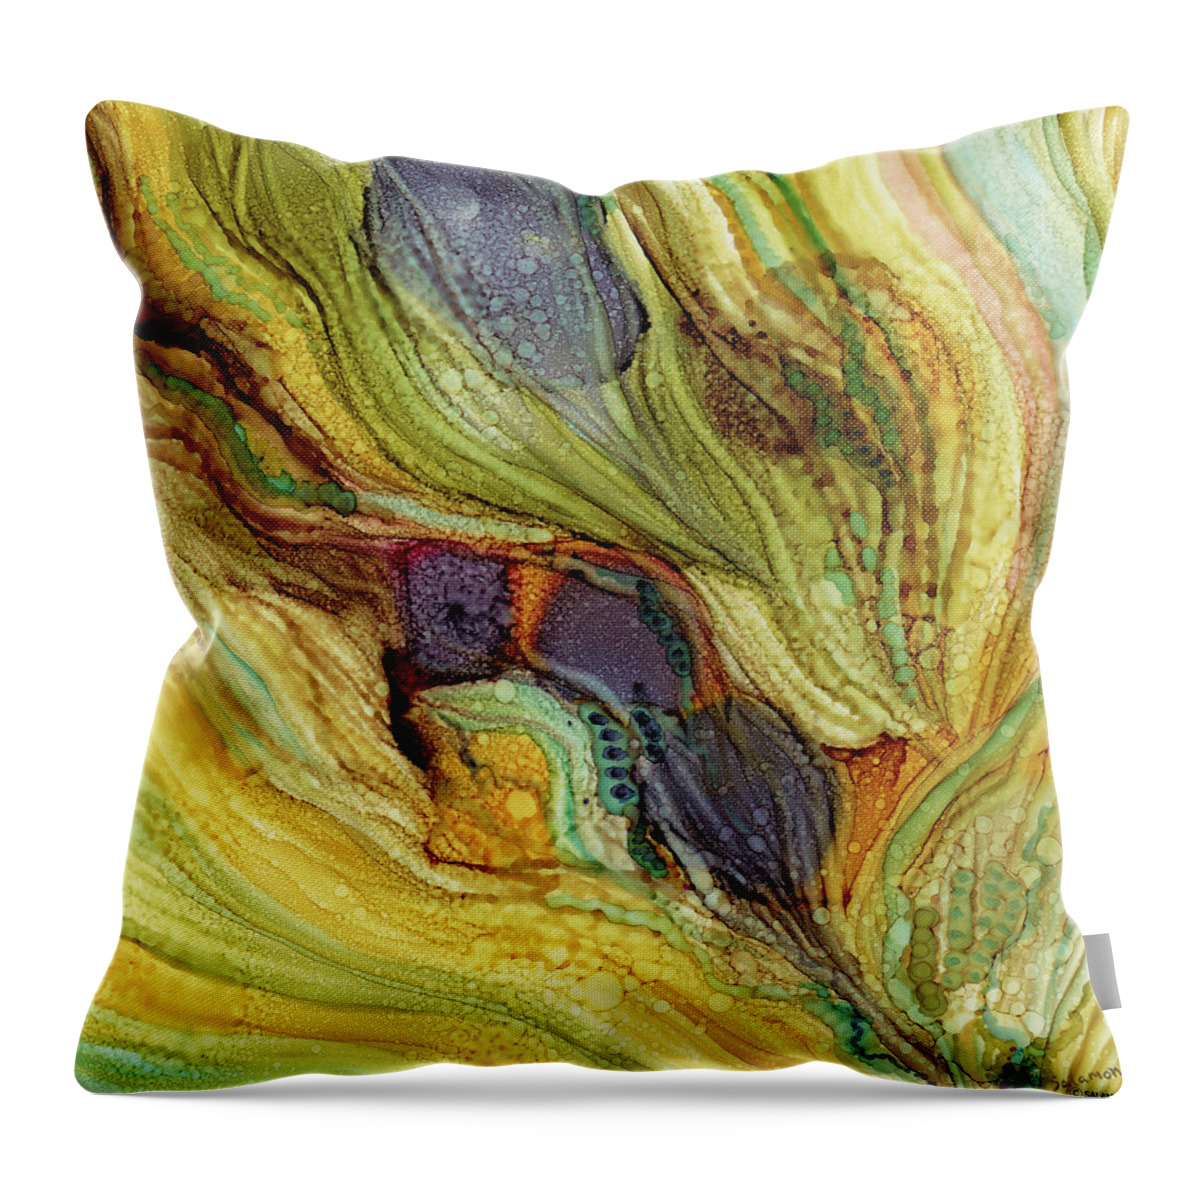 Desert Colors Mystery Sepia Turquoise Arizona Tucson Santa Fe Brown Eggplant Abstract Throw Pillow featuring the painting Desert Mysteries by Brenda Salamone